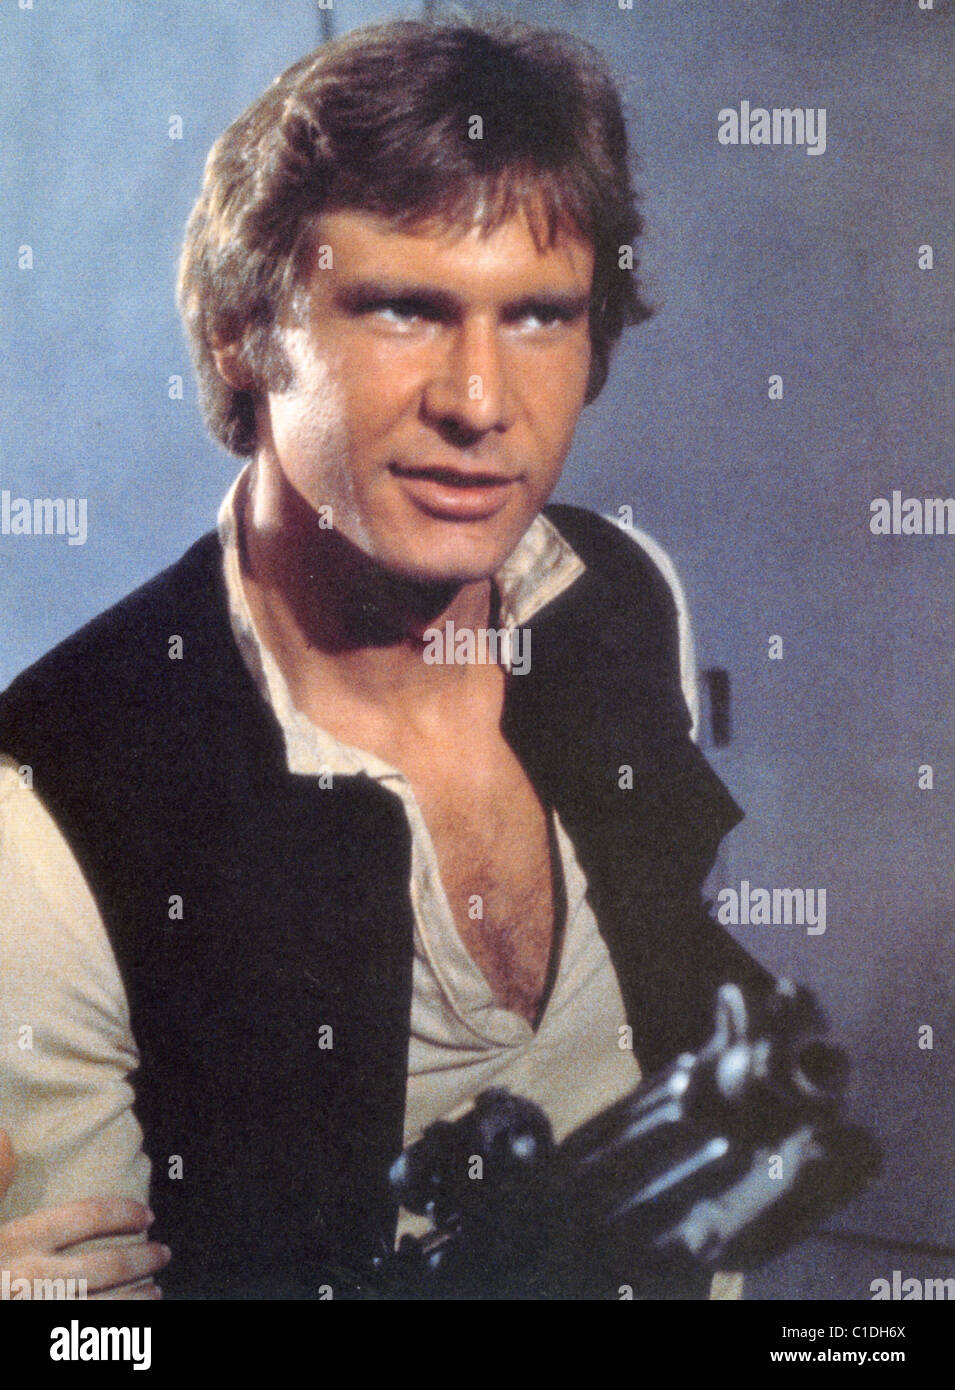 STAR WARS EPISODE IV - A NEW HOPE 1977 Lucasfilm/Paramount film with Harrison Ford as Luke Skywalker Stock Photo